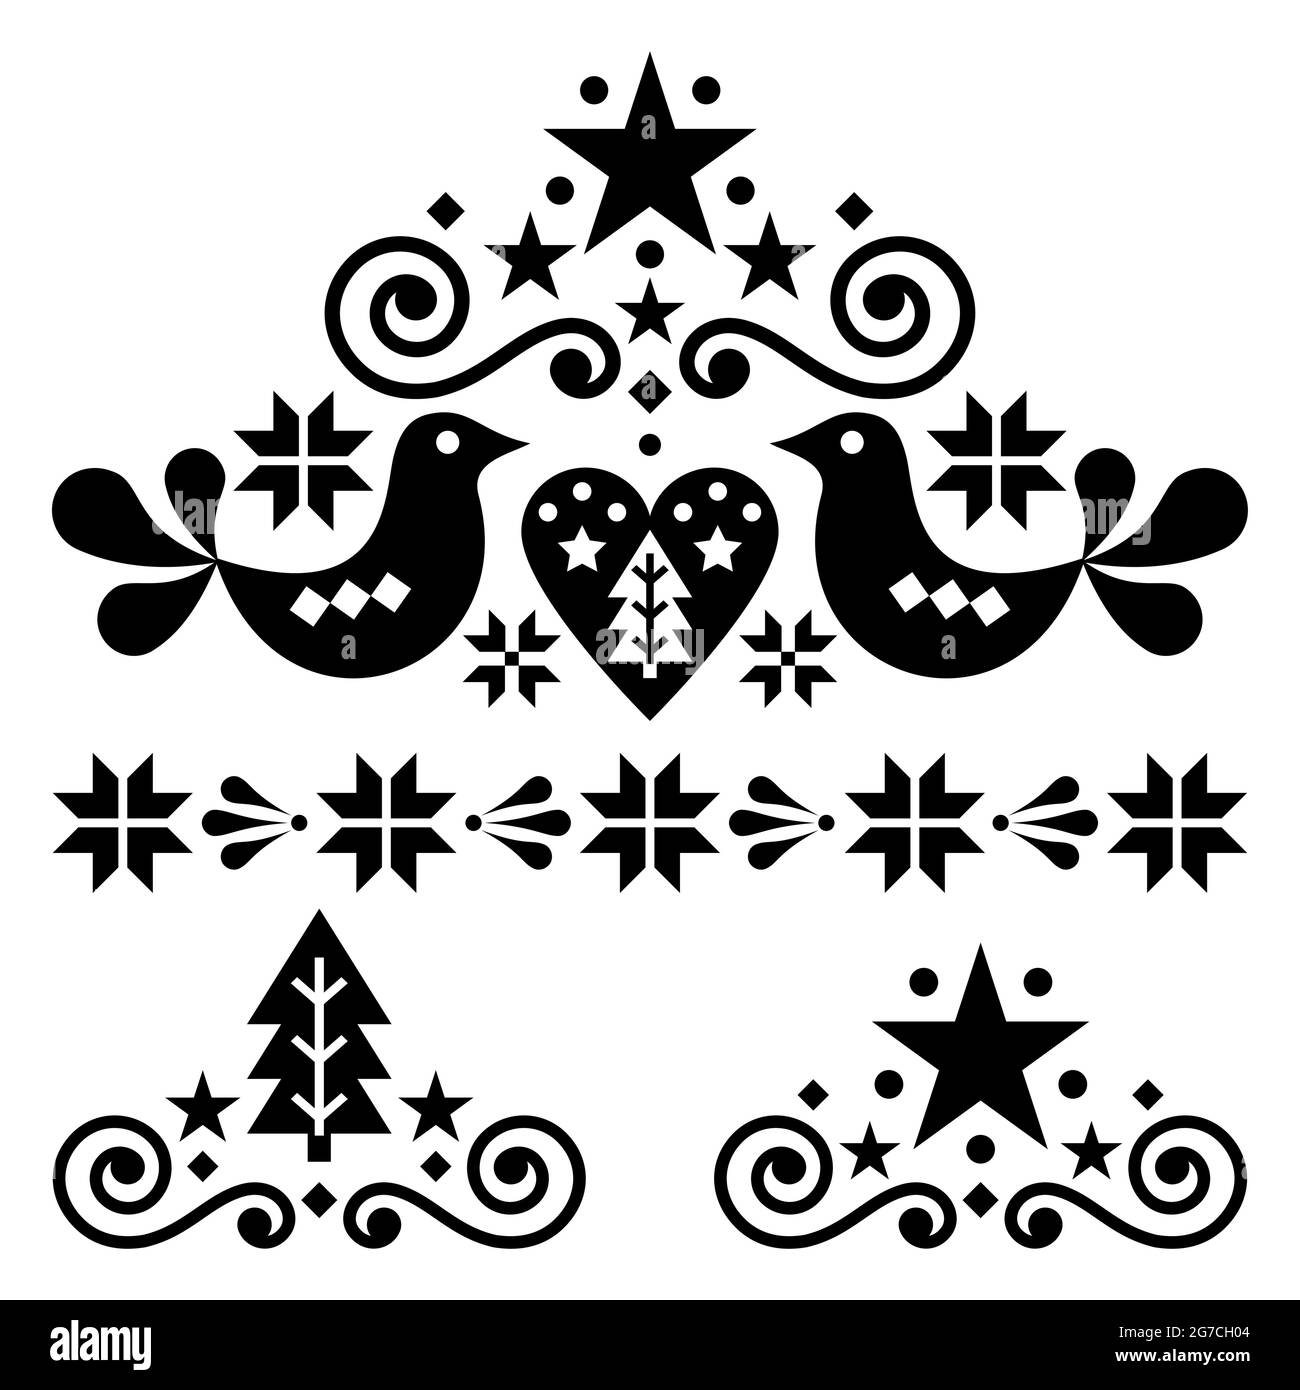 Xmas scandinavian folk art vector design set - Christmas single patterns collection, black cute floral ornament with birds, snowflakes and Christmas t Stock Vector